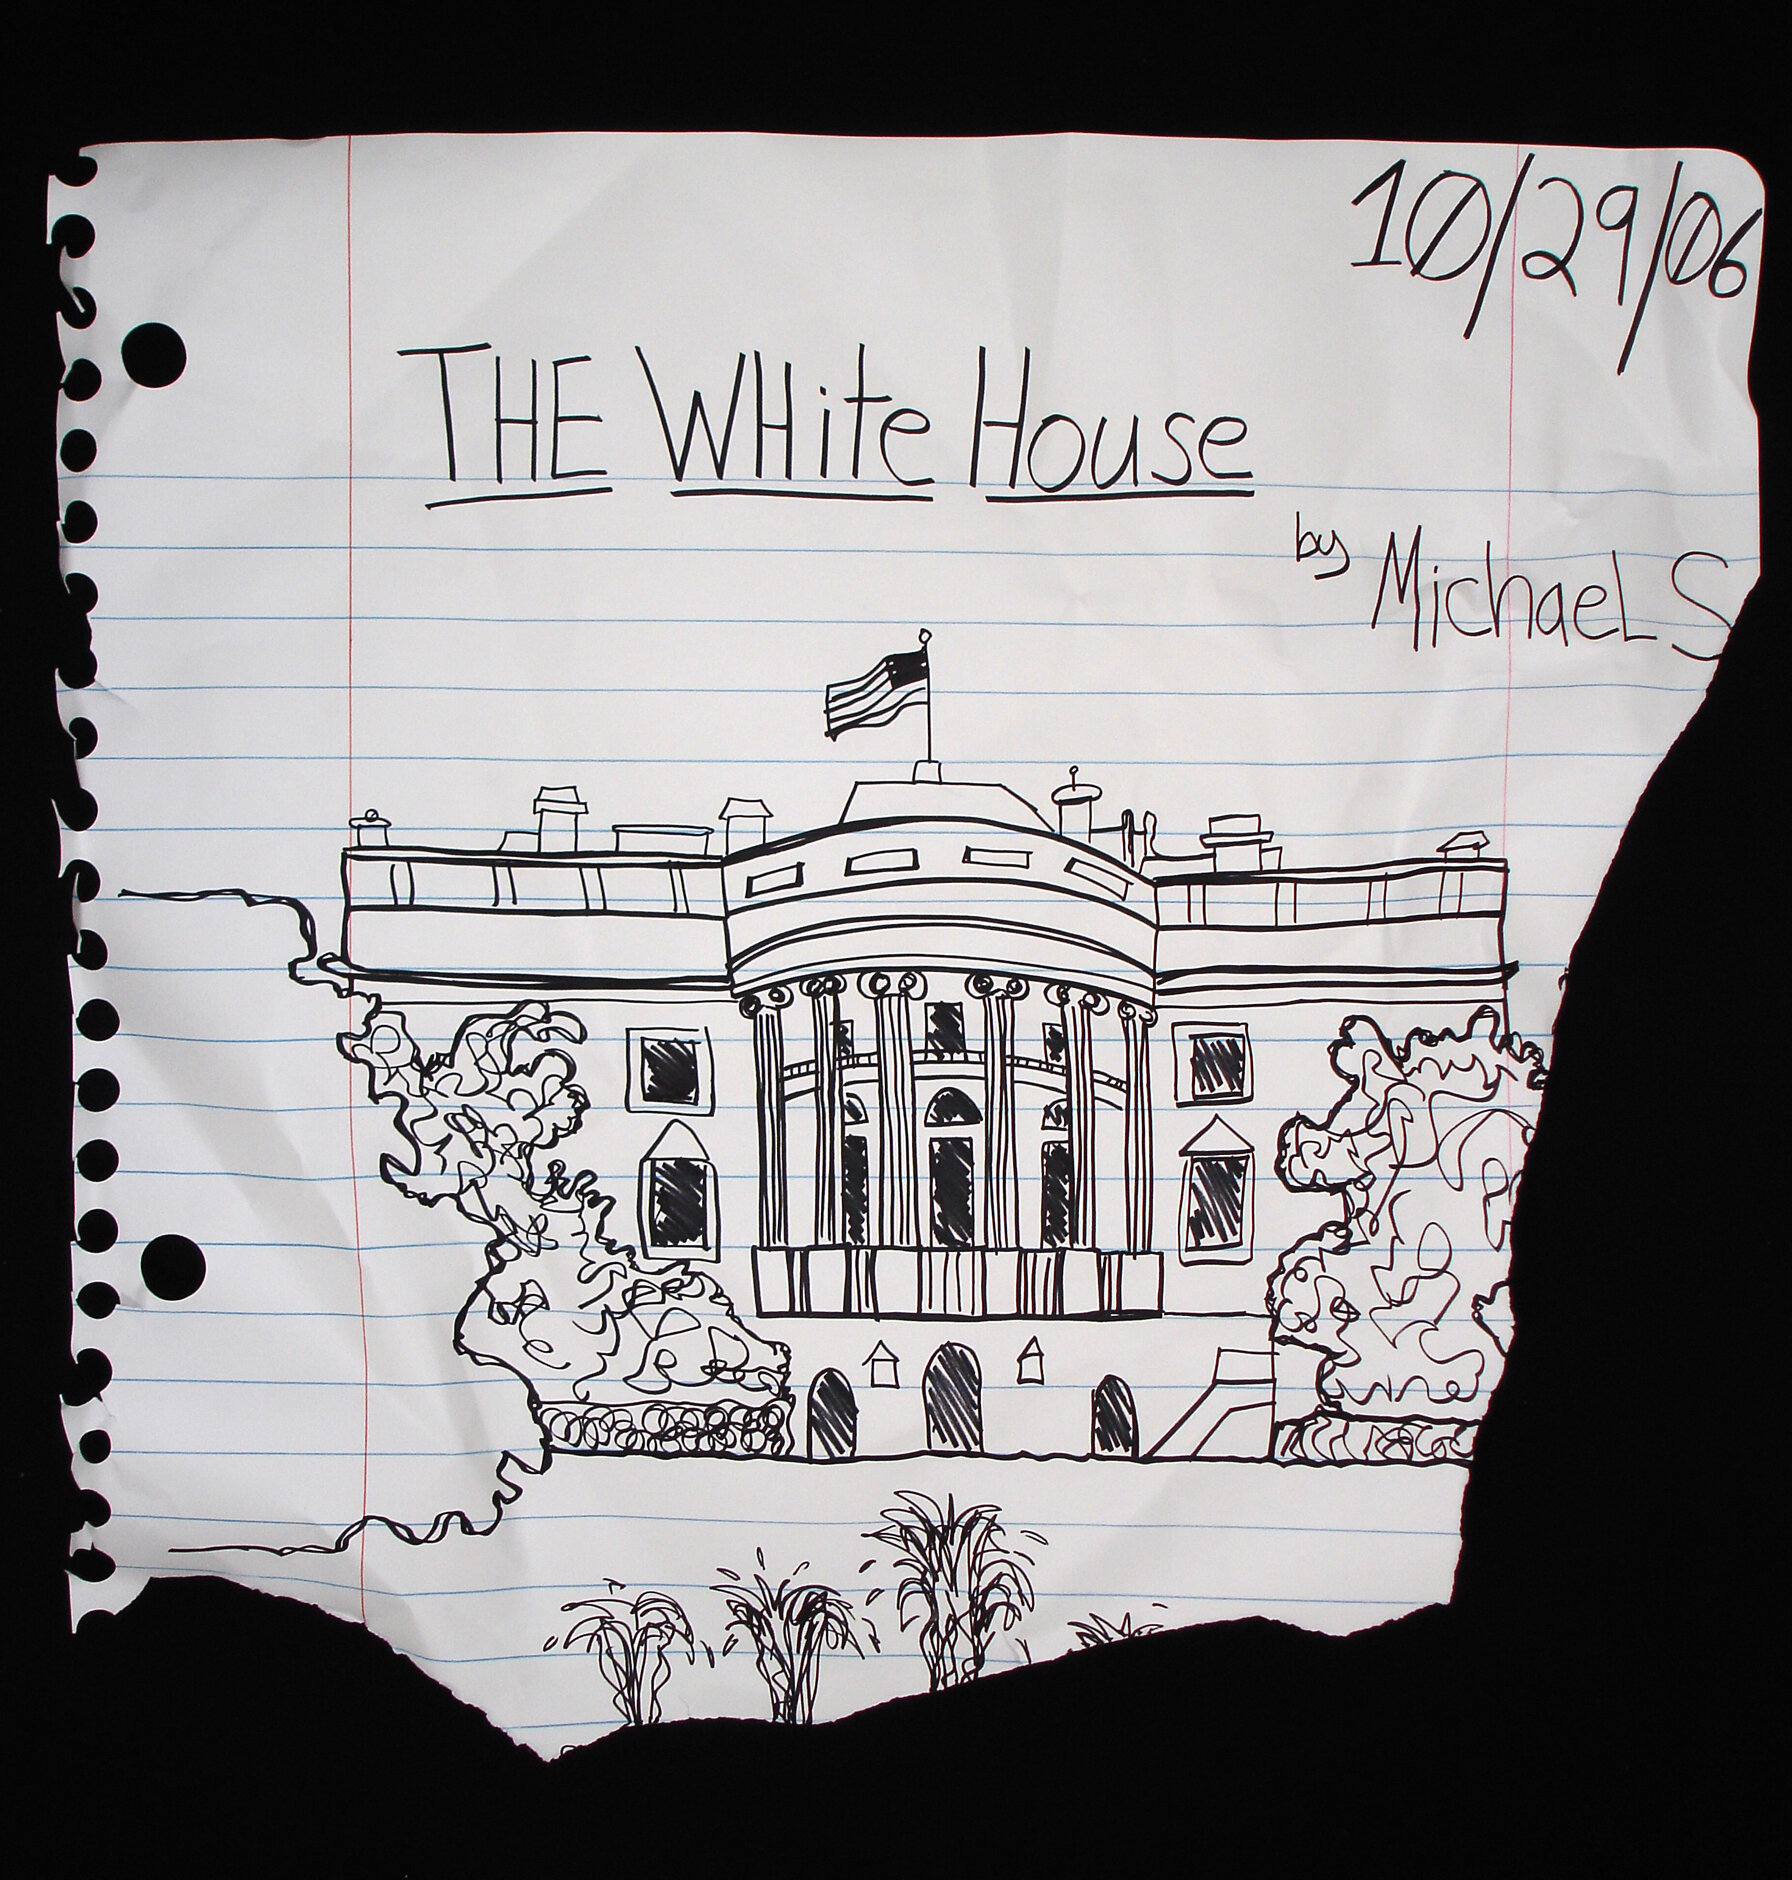   The White House III,   2006. Marker, colored pencil on paper, 48 x 51 in. 